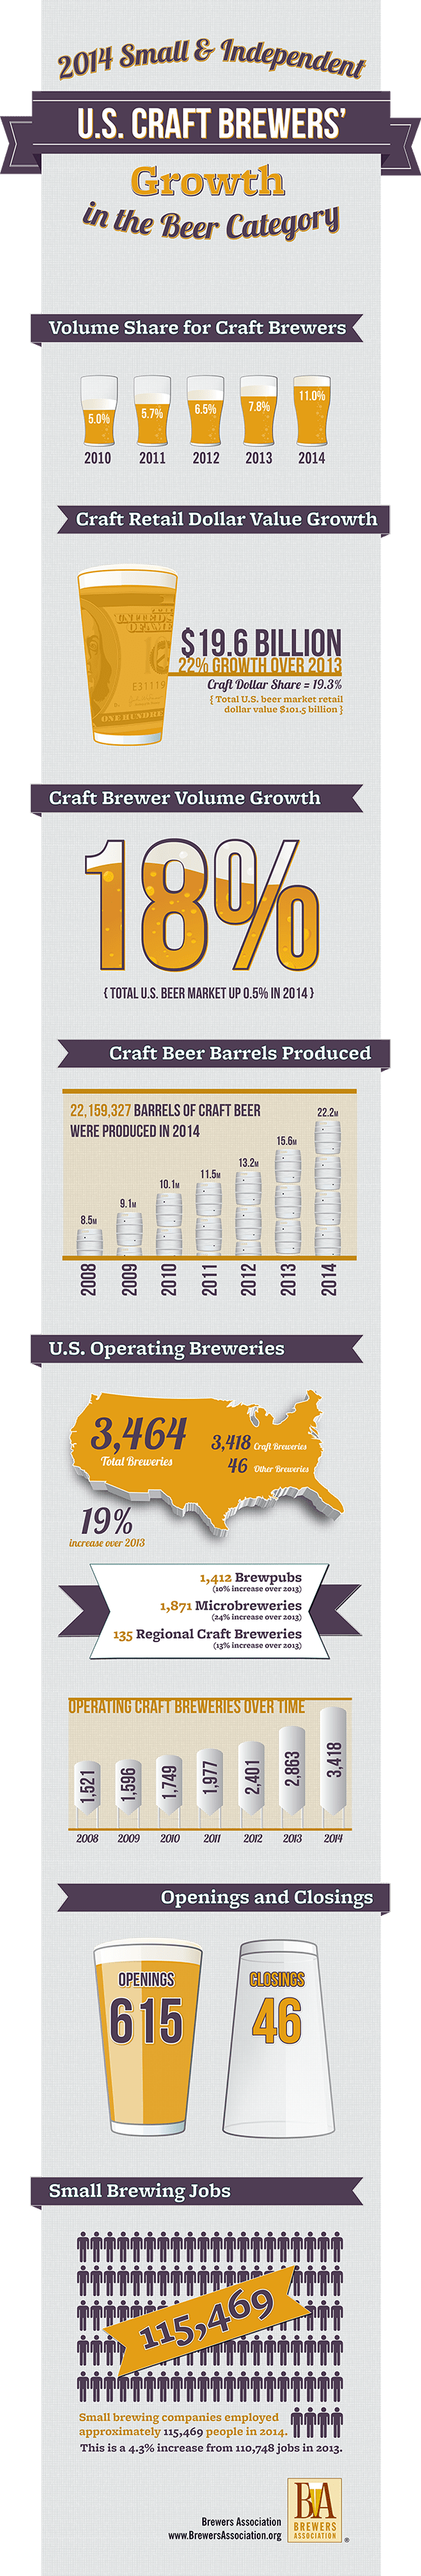 US Craft Brewers' Growth Infographic